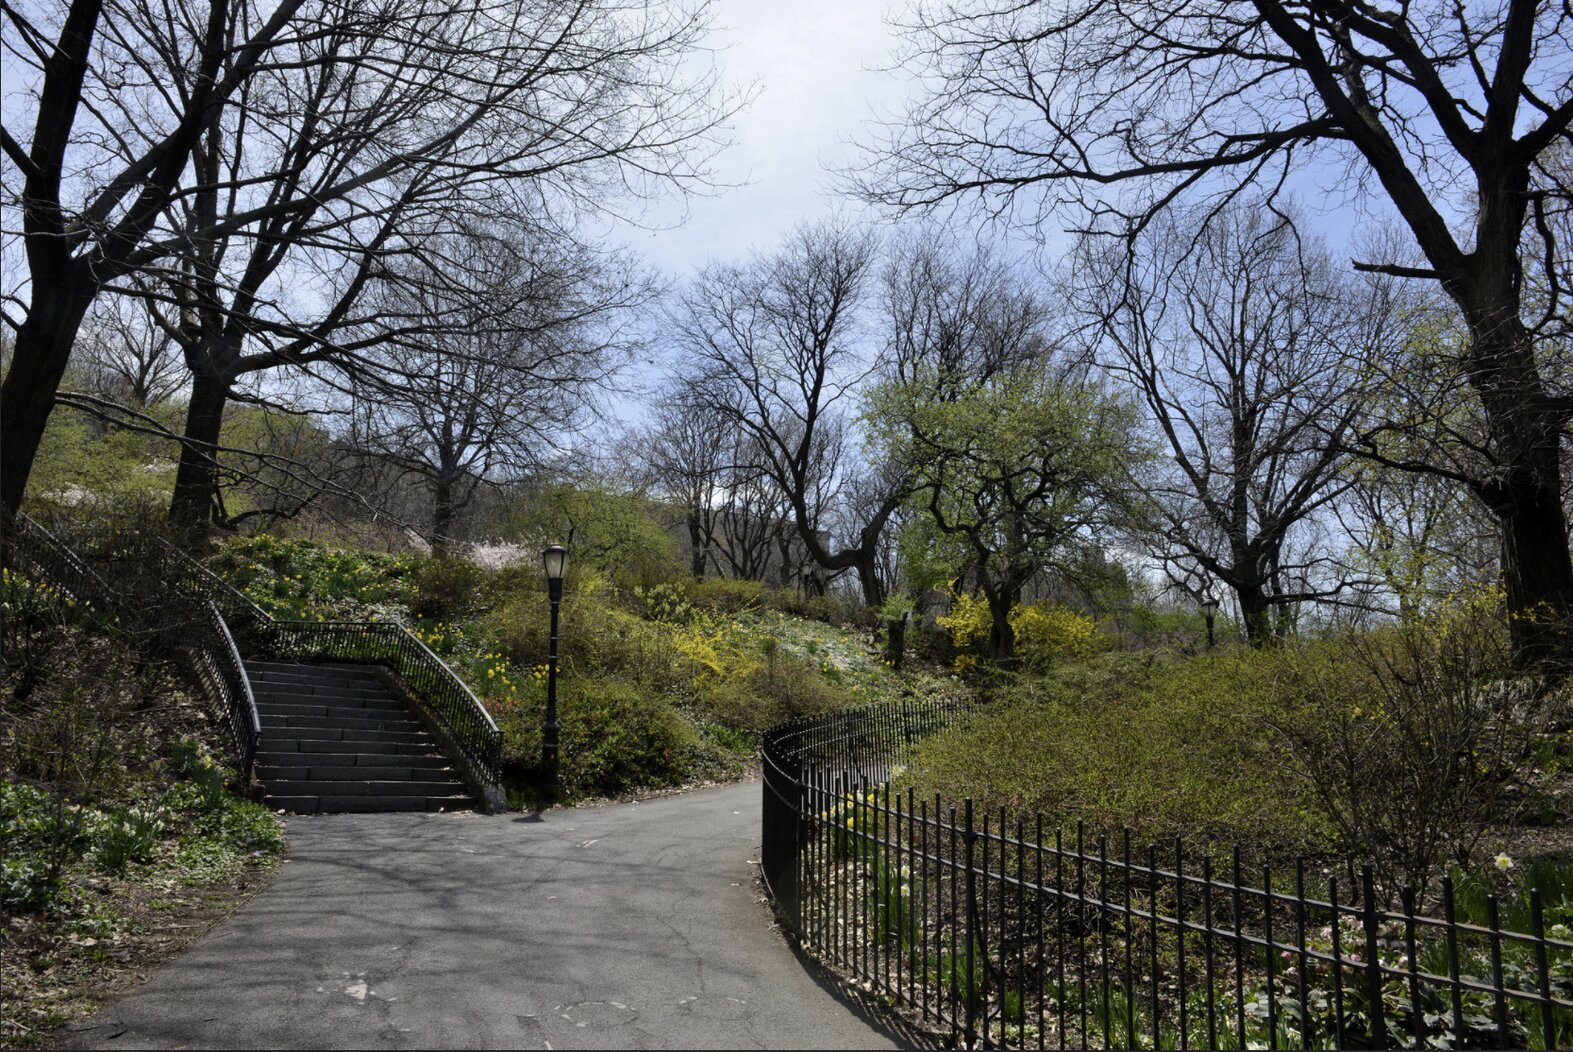 The habitat landscaping of Riverside Park has attracted over 170 species of migrating birds. Photo: <a href="https://www.flickr.com/photos/edcnyc/" target="_blank">Eddie Crimmins</a>